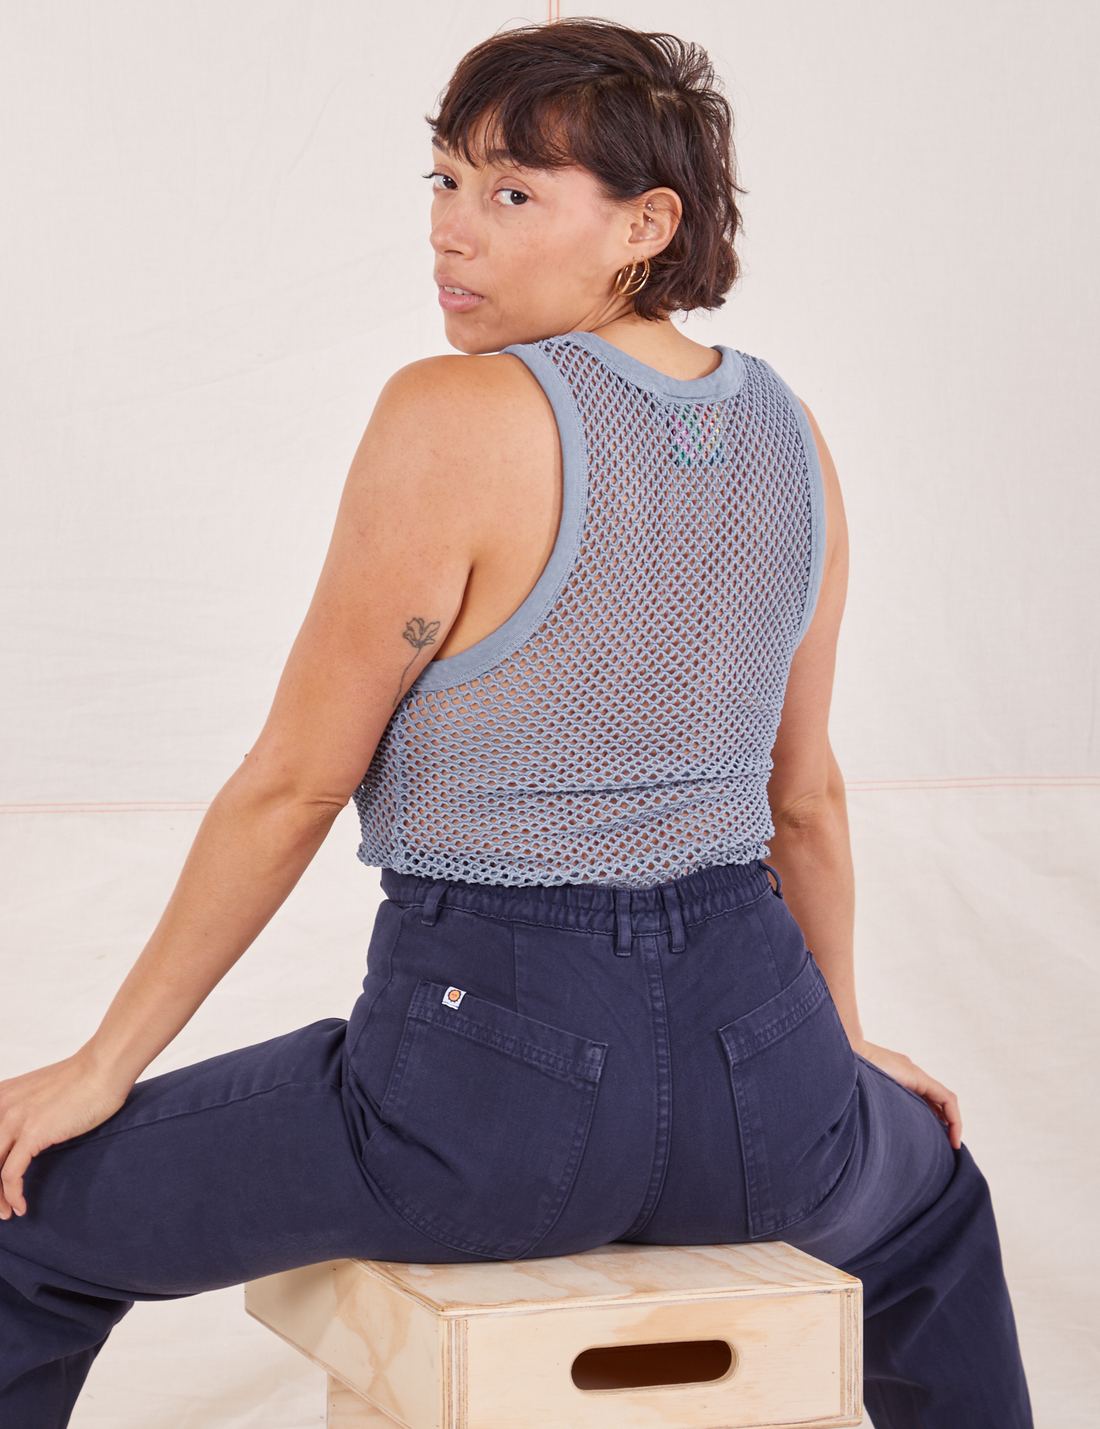 Tiara is sitting on a wooden crate with her back turned. She is wearing Mesh Tank Top in Periwinkle and navy Western Pants